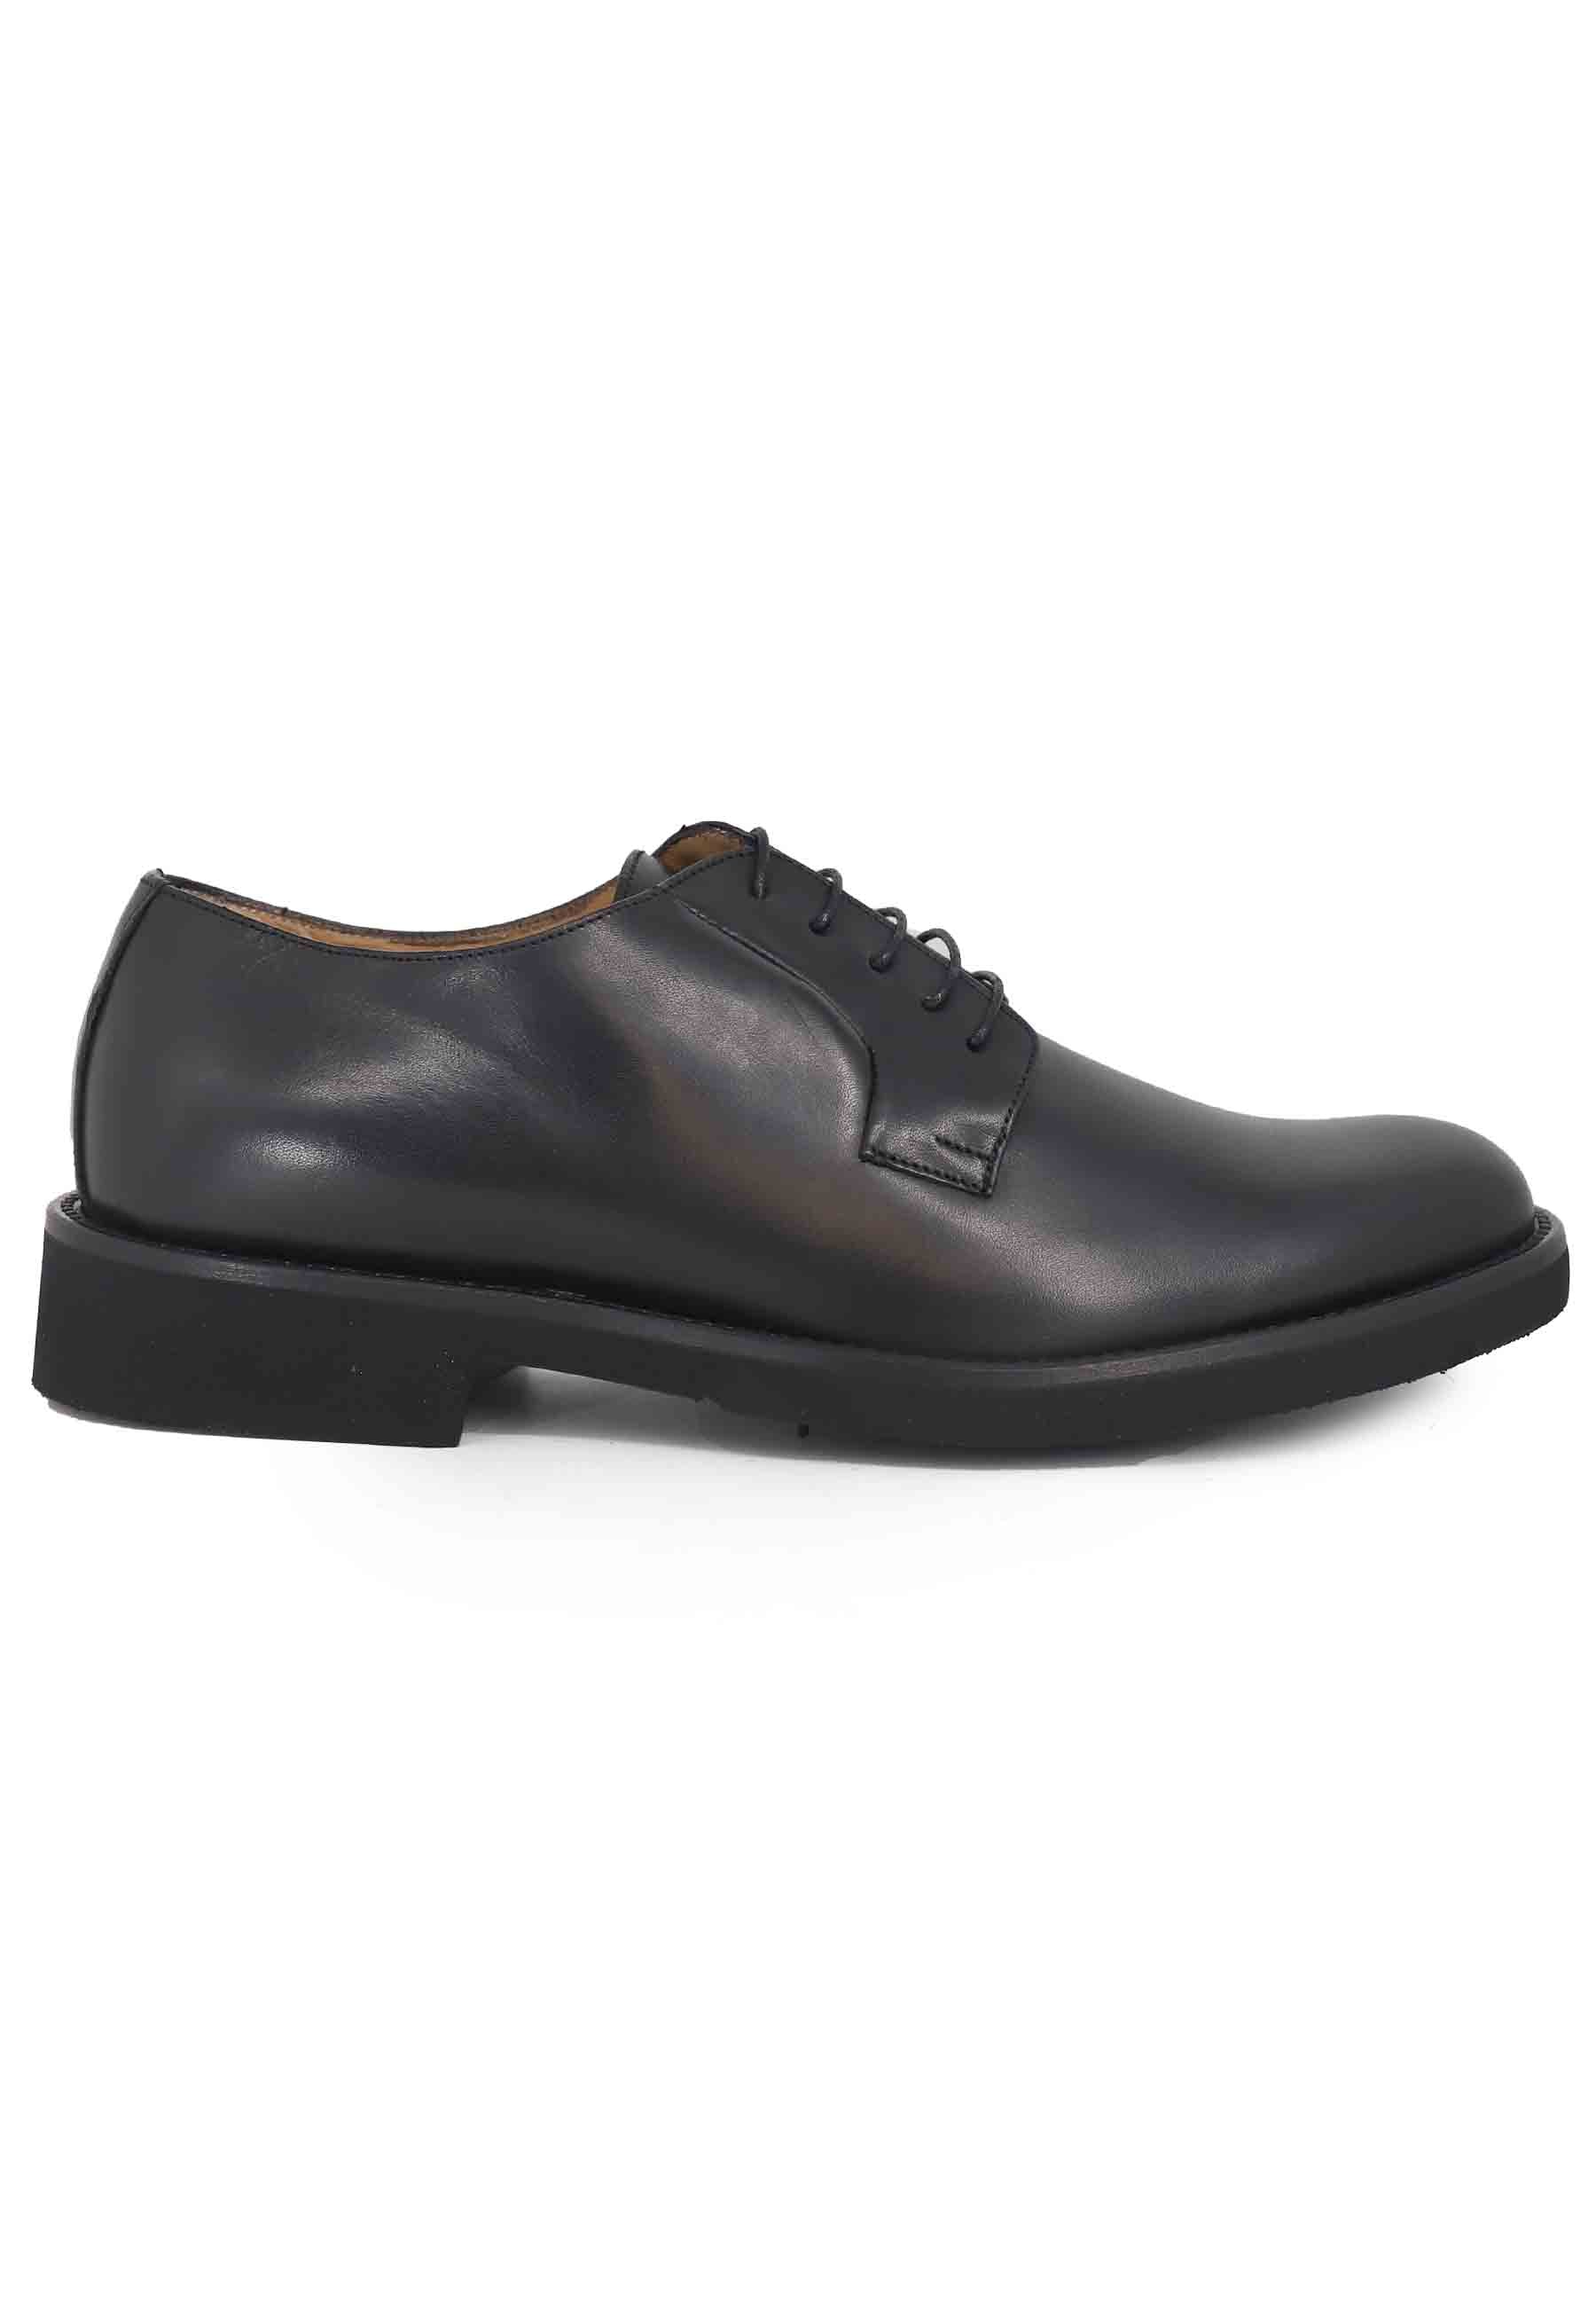 Men's black leather lace-ups with ultra-light rubber sole and round toe